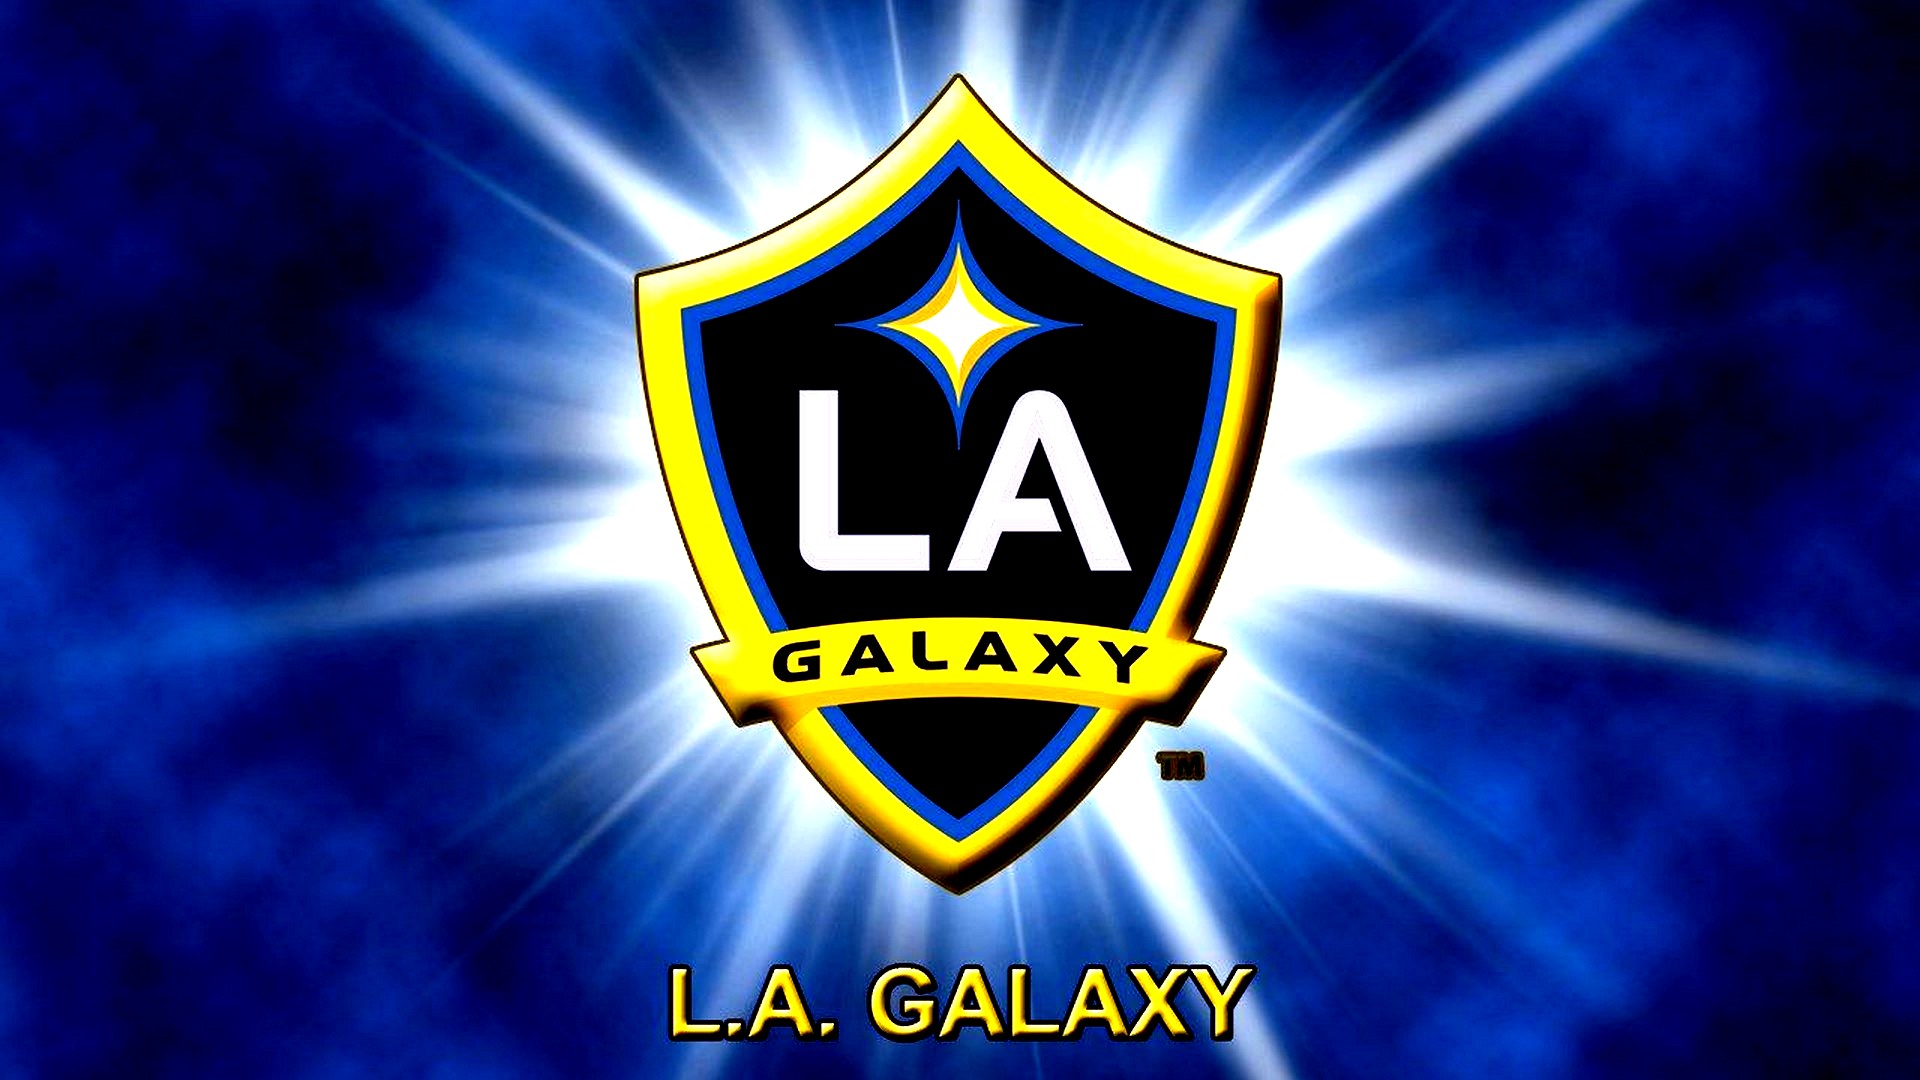 HD Desktop Wallpaper LA Galaxy With high-resolution 1920X1080 pixel. You can use this wallpaper for your Desktop Computers, Mac Screensavers, Windows Backgrounds, iPhone Wallpapers, Tablet or Android Lock screen and another Mobile device